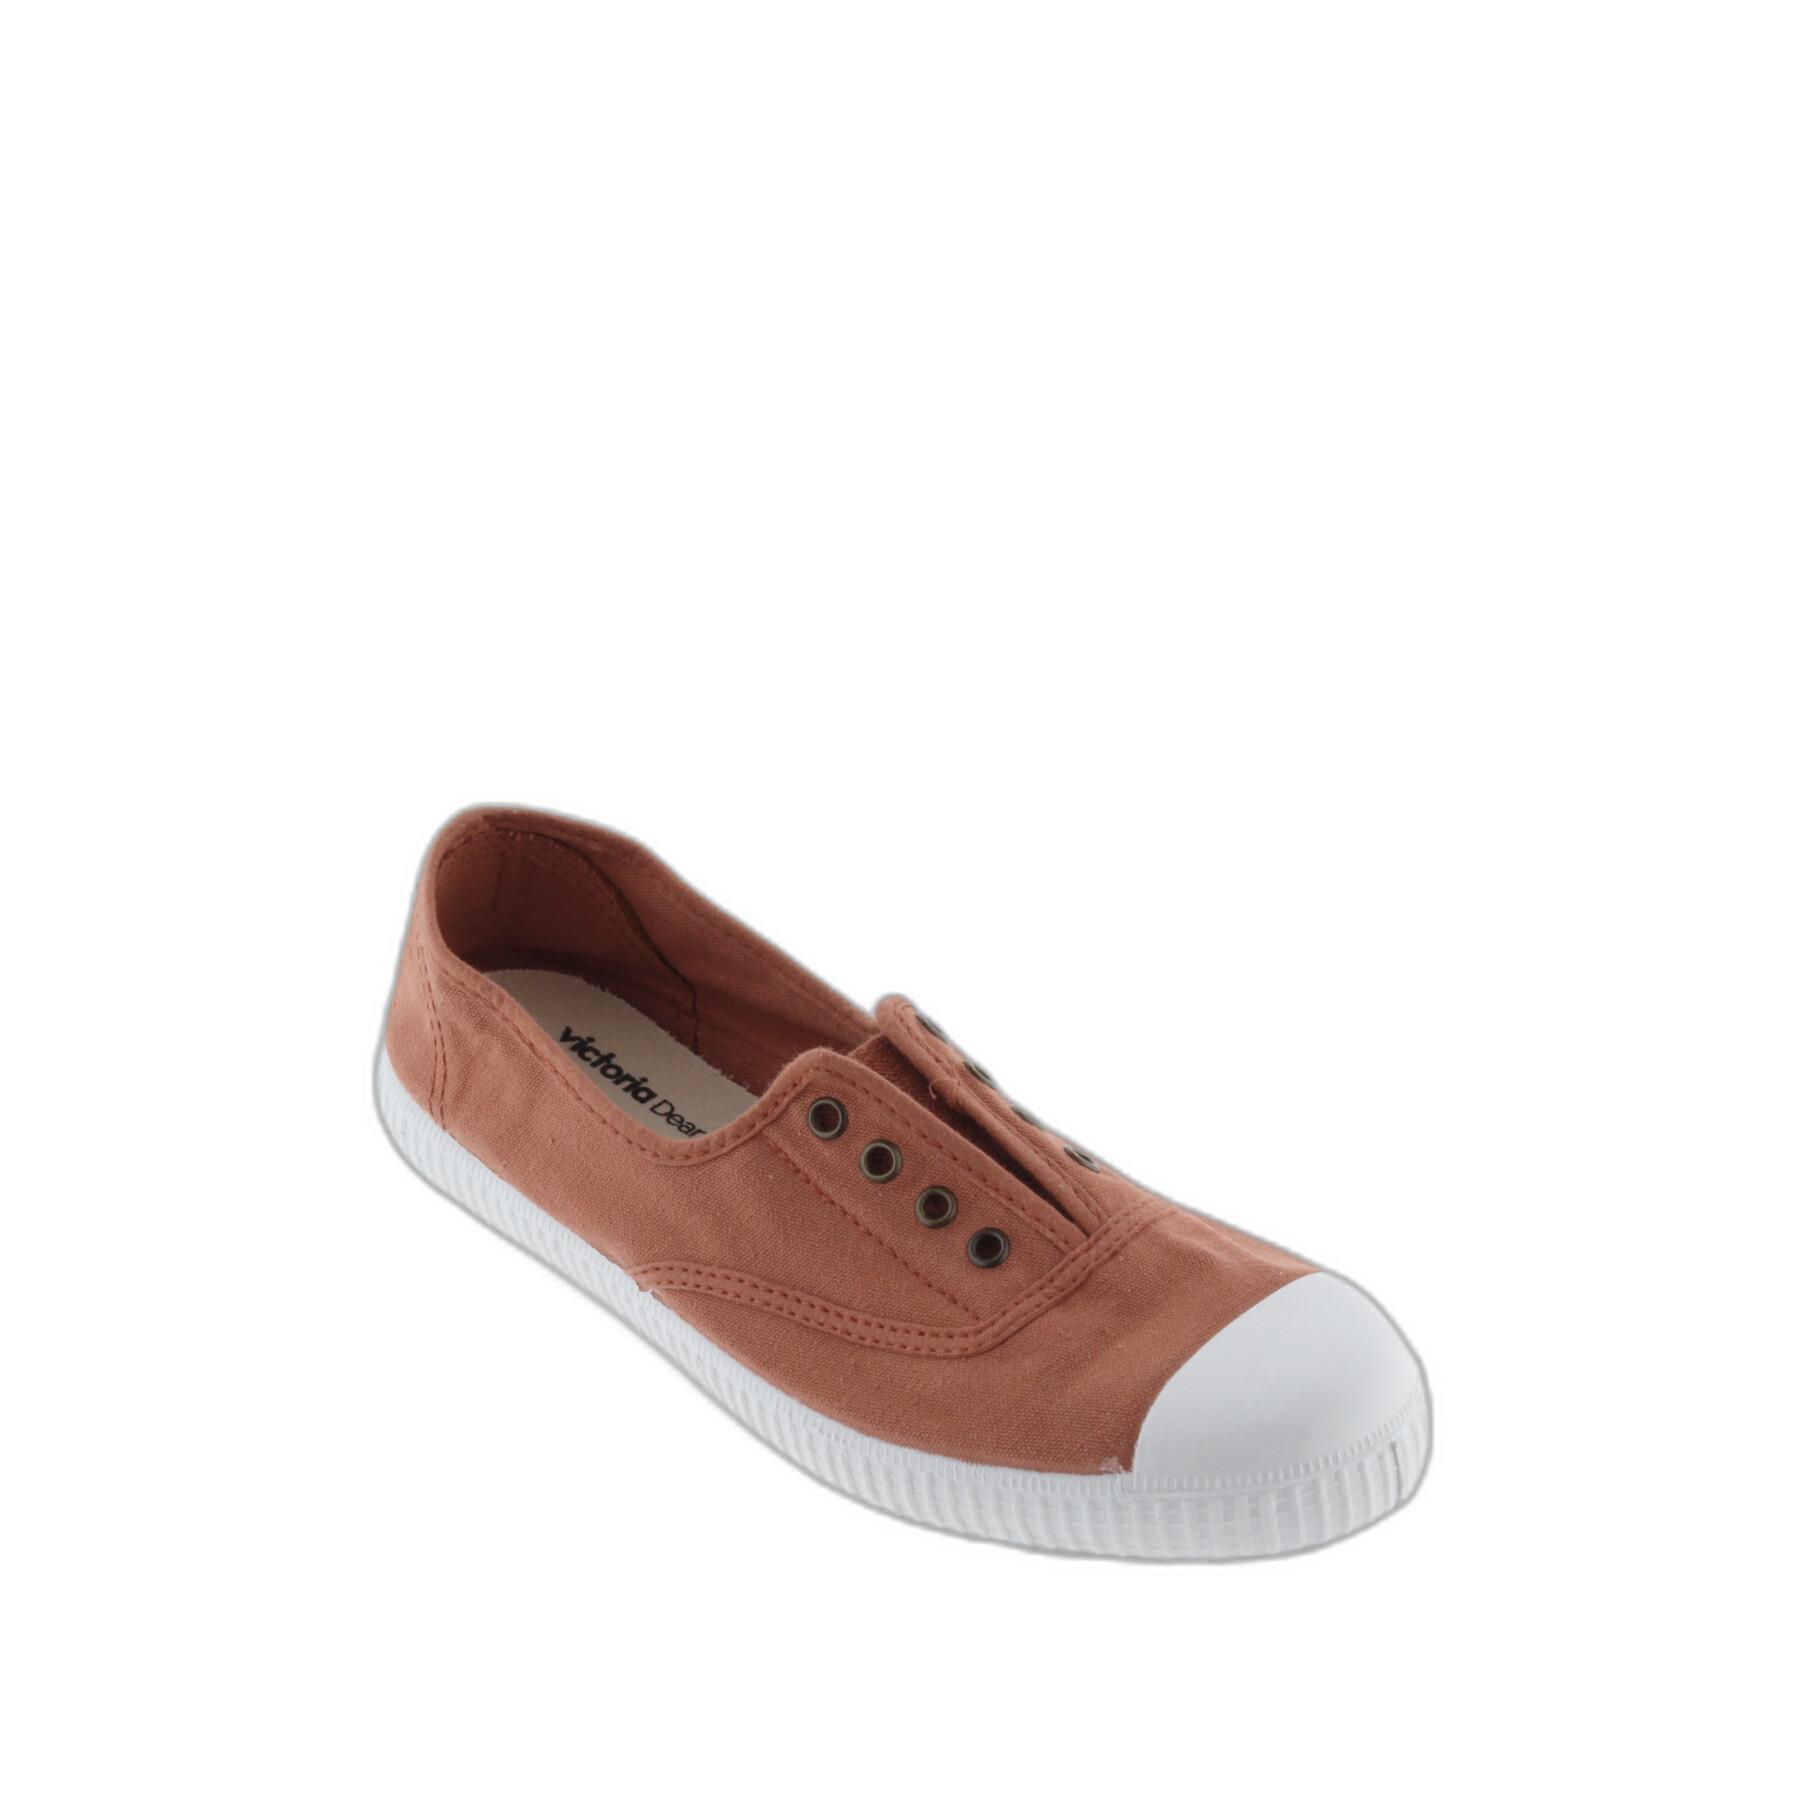 Women's elastic dyed canvas sneakers Victoria 1915